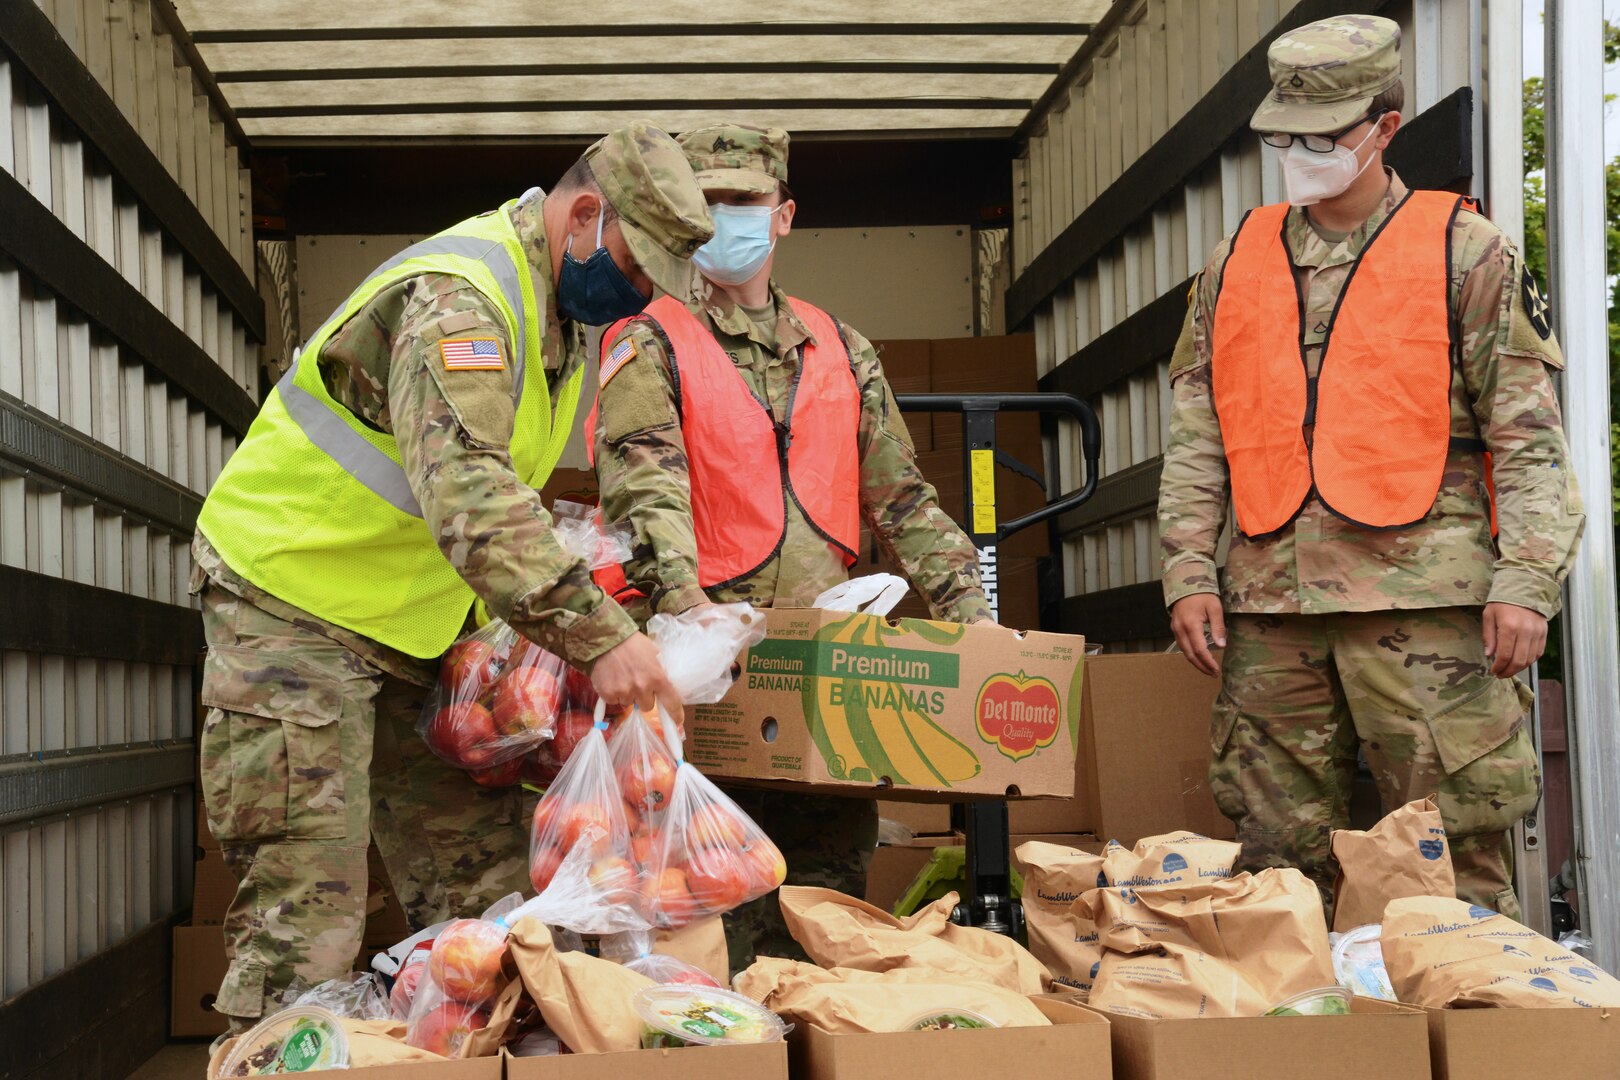 Members of the Washington National Guard pack and distribute food at a food bank in Touchet, Wash., May 13, 2020. Washington Air and Army National Guards service members are supporting food banks around the state during the COVID-19 pandemic.